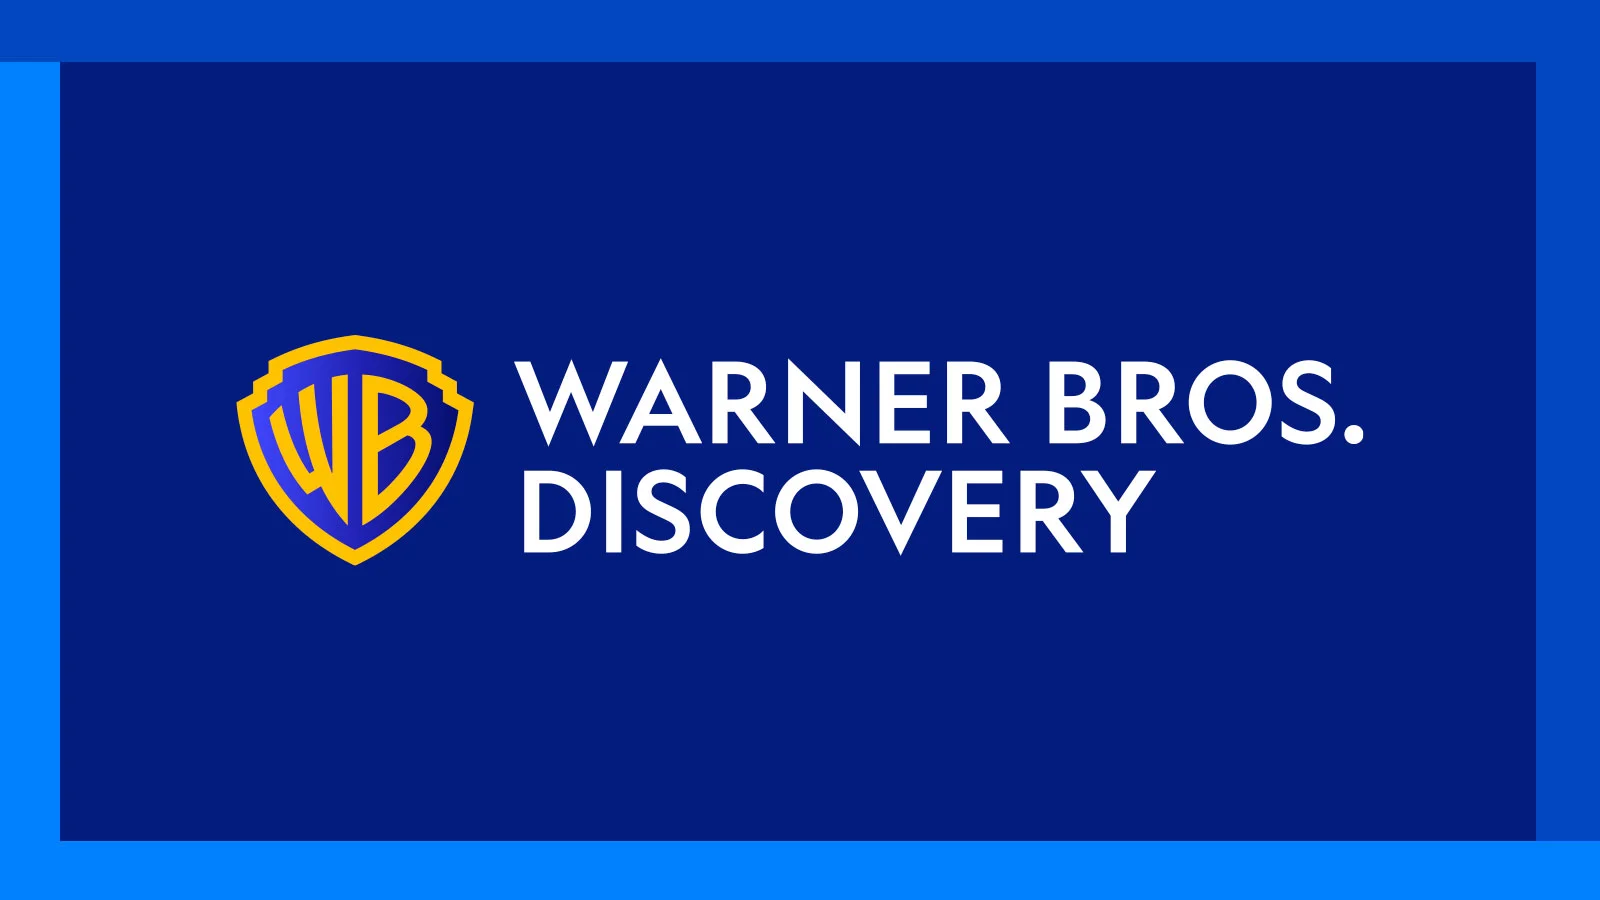 Warner Bros. Discovery Analyst Slashes 3Q Estimates Citing FX Headwinds, Tougher Comps